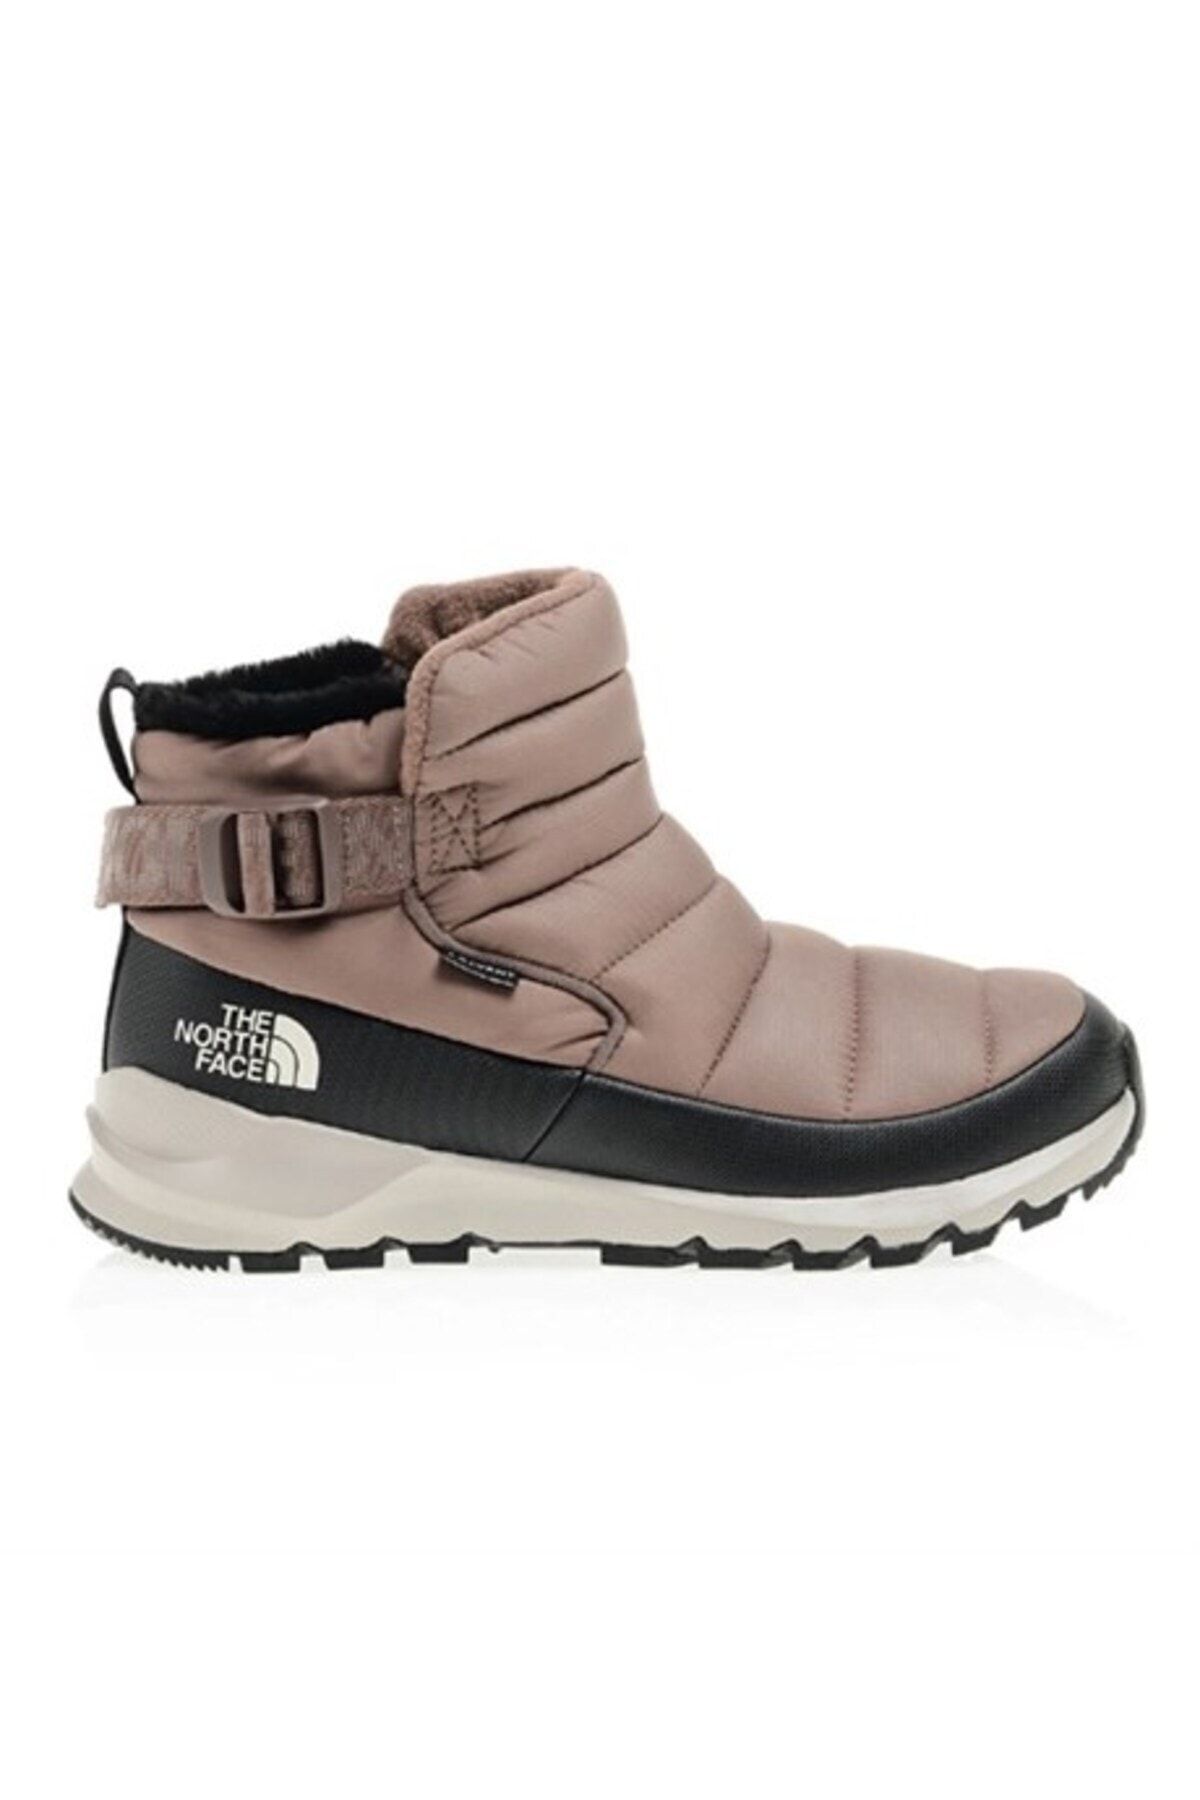 The North Face W Thermoball Pull-on Wp Kadın Pembe Spor Ayakkabı Nf0a5lwe7t41